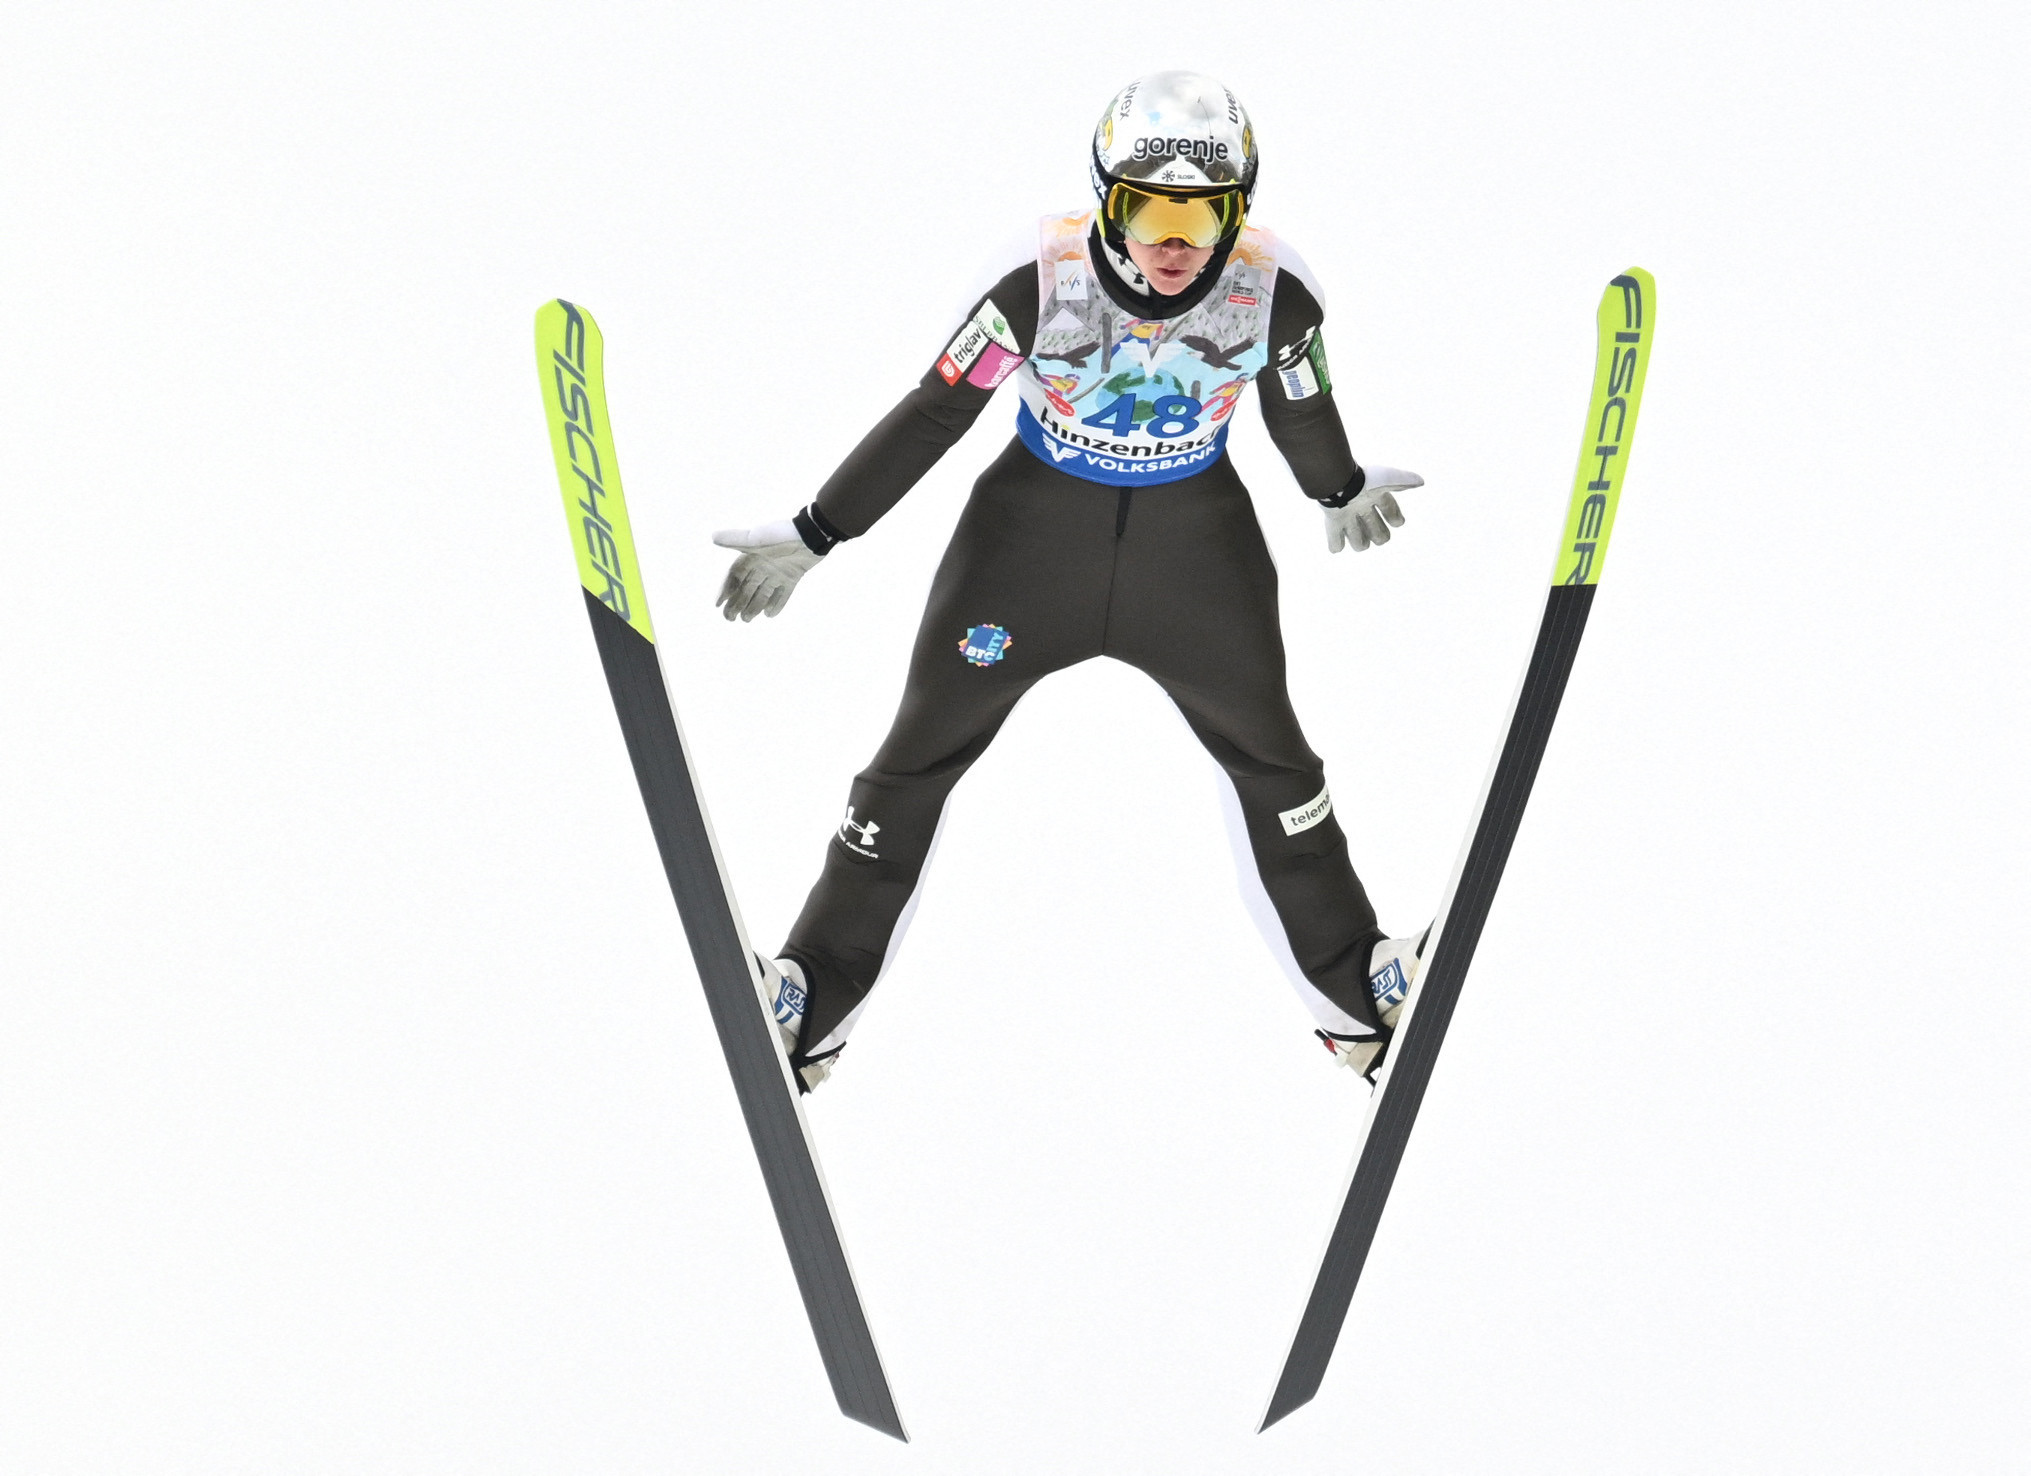 Bogataj tops Slovenian clean sweep to seal Oderhof Ski Jumping World Cup double